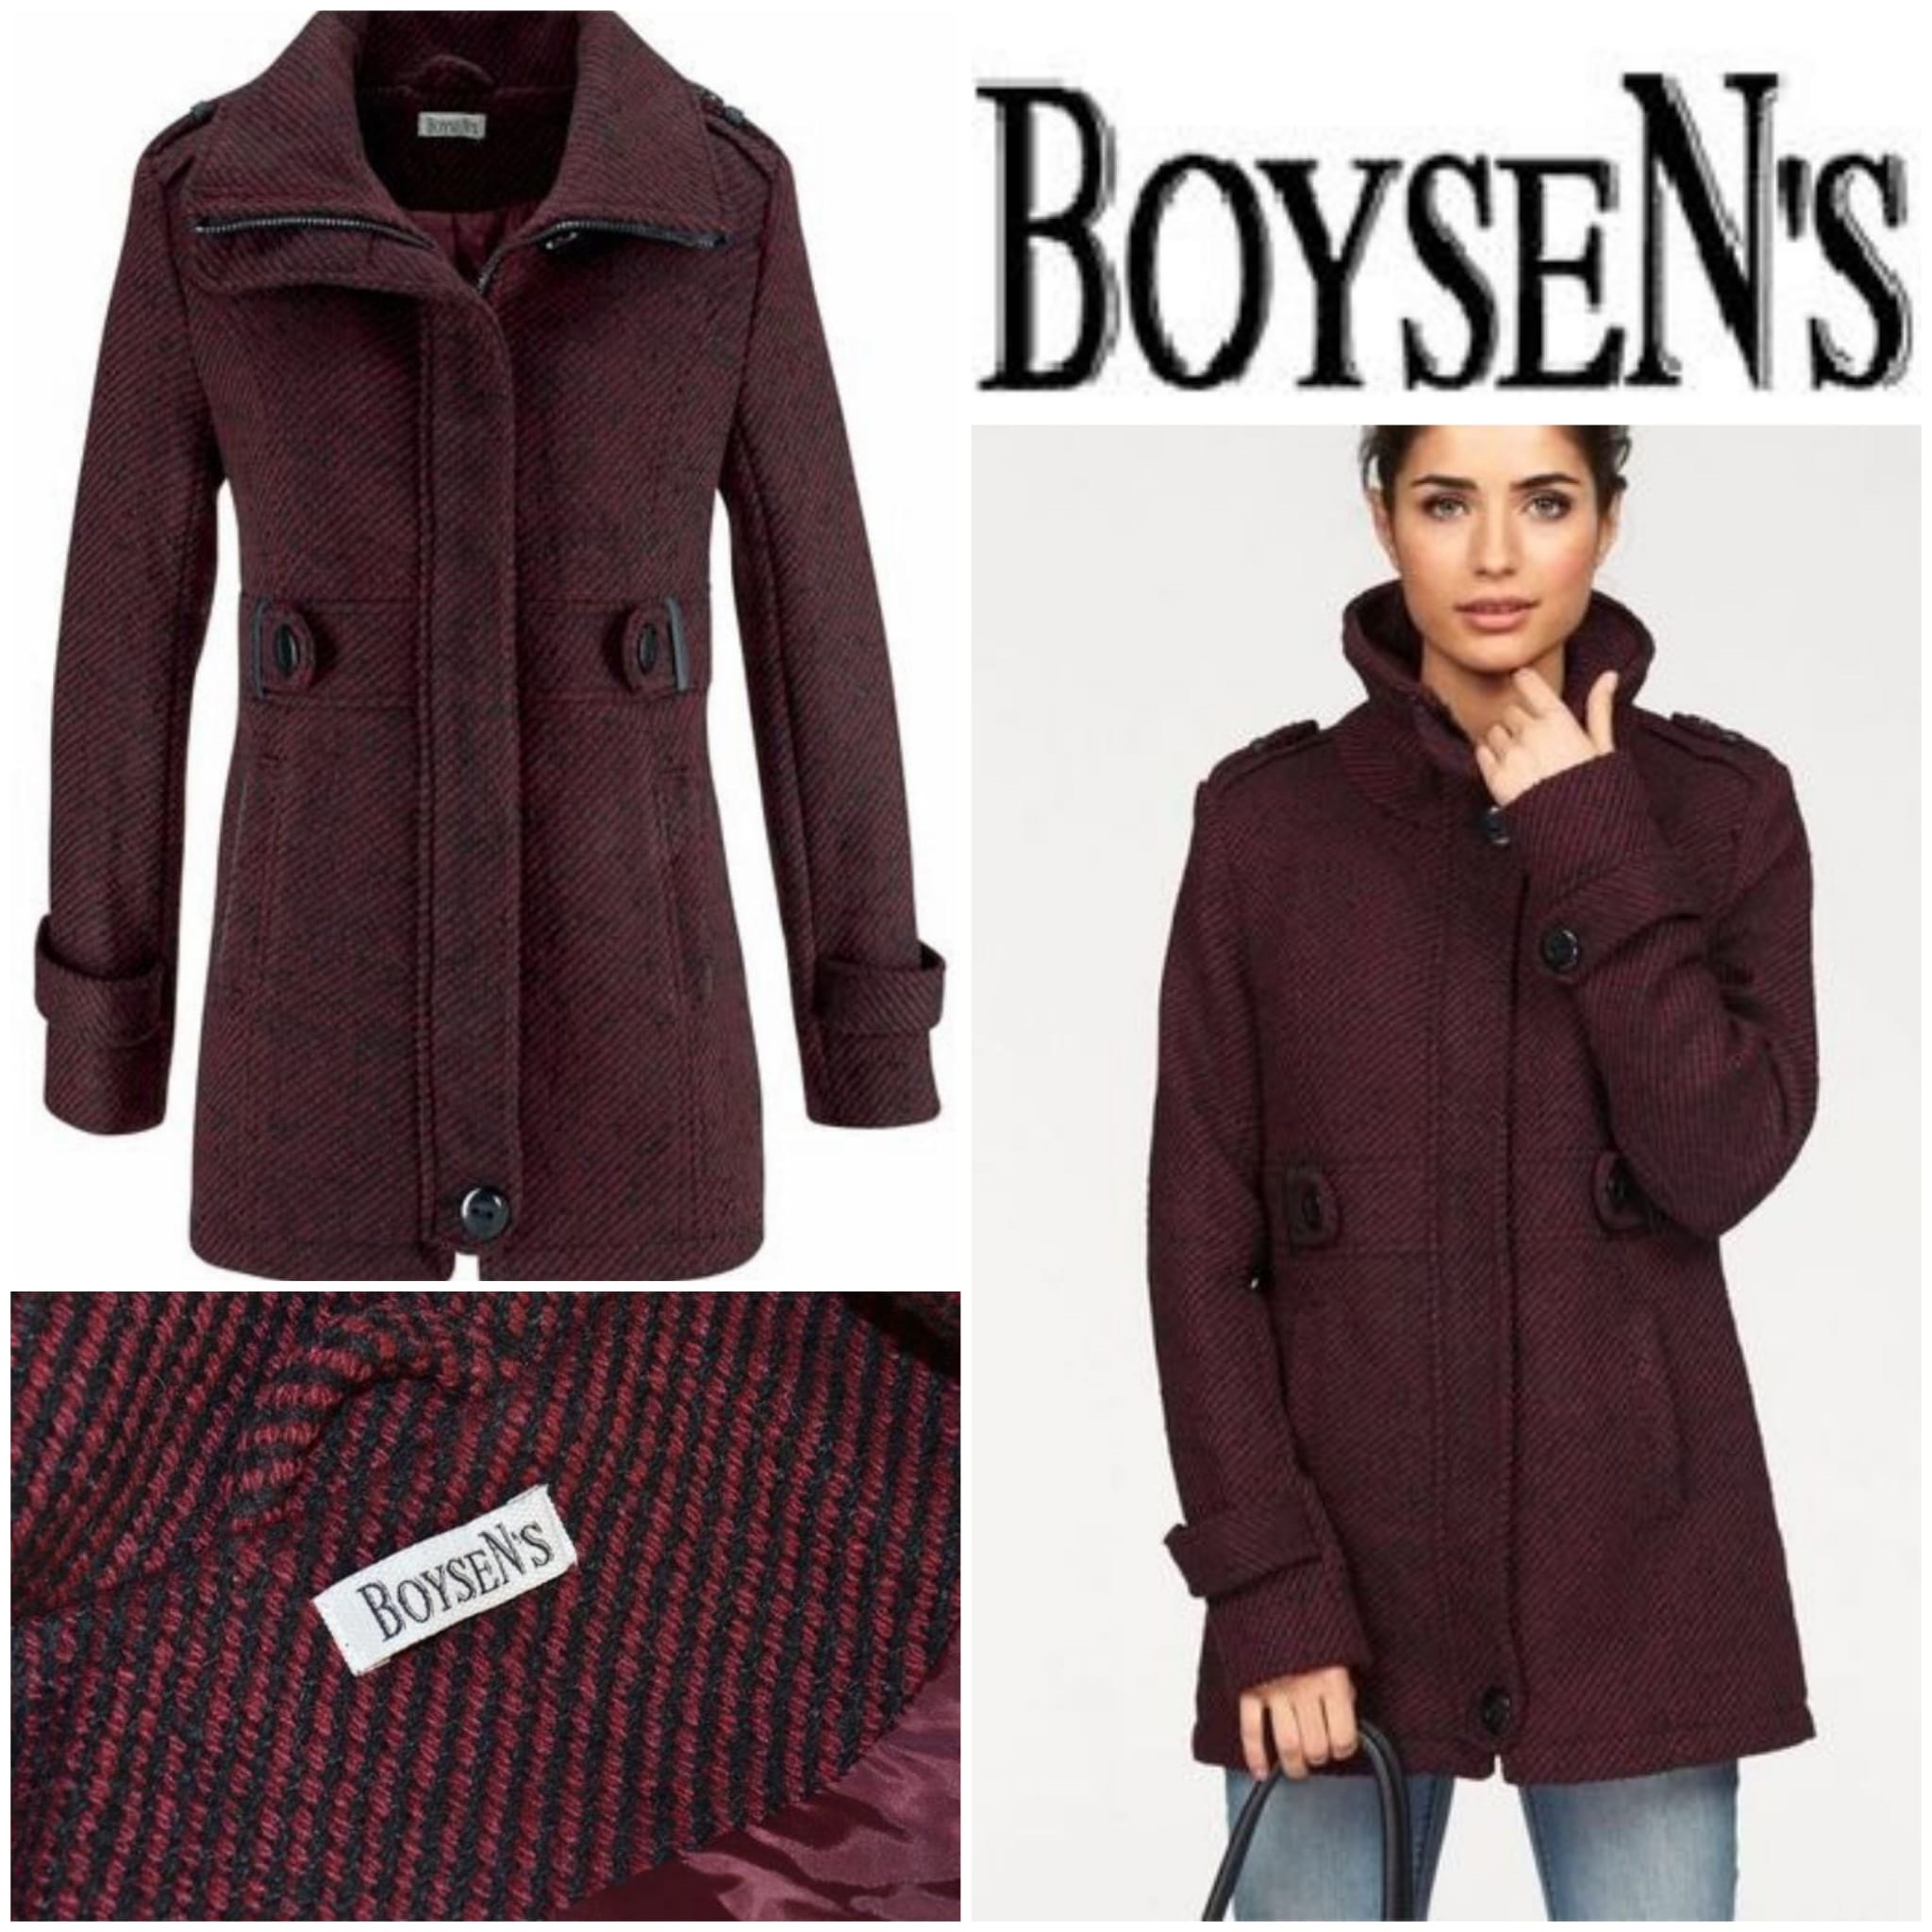  Our prices are the bomb!!! Boysen's Women's Coat